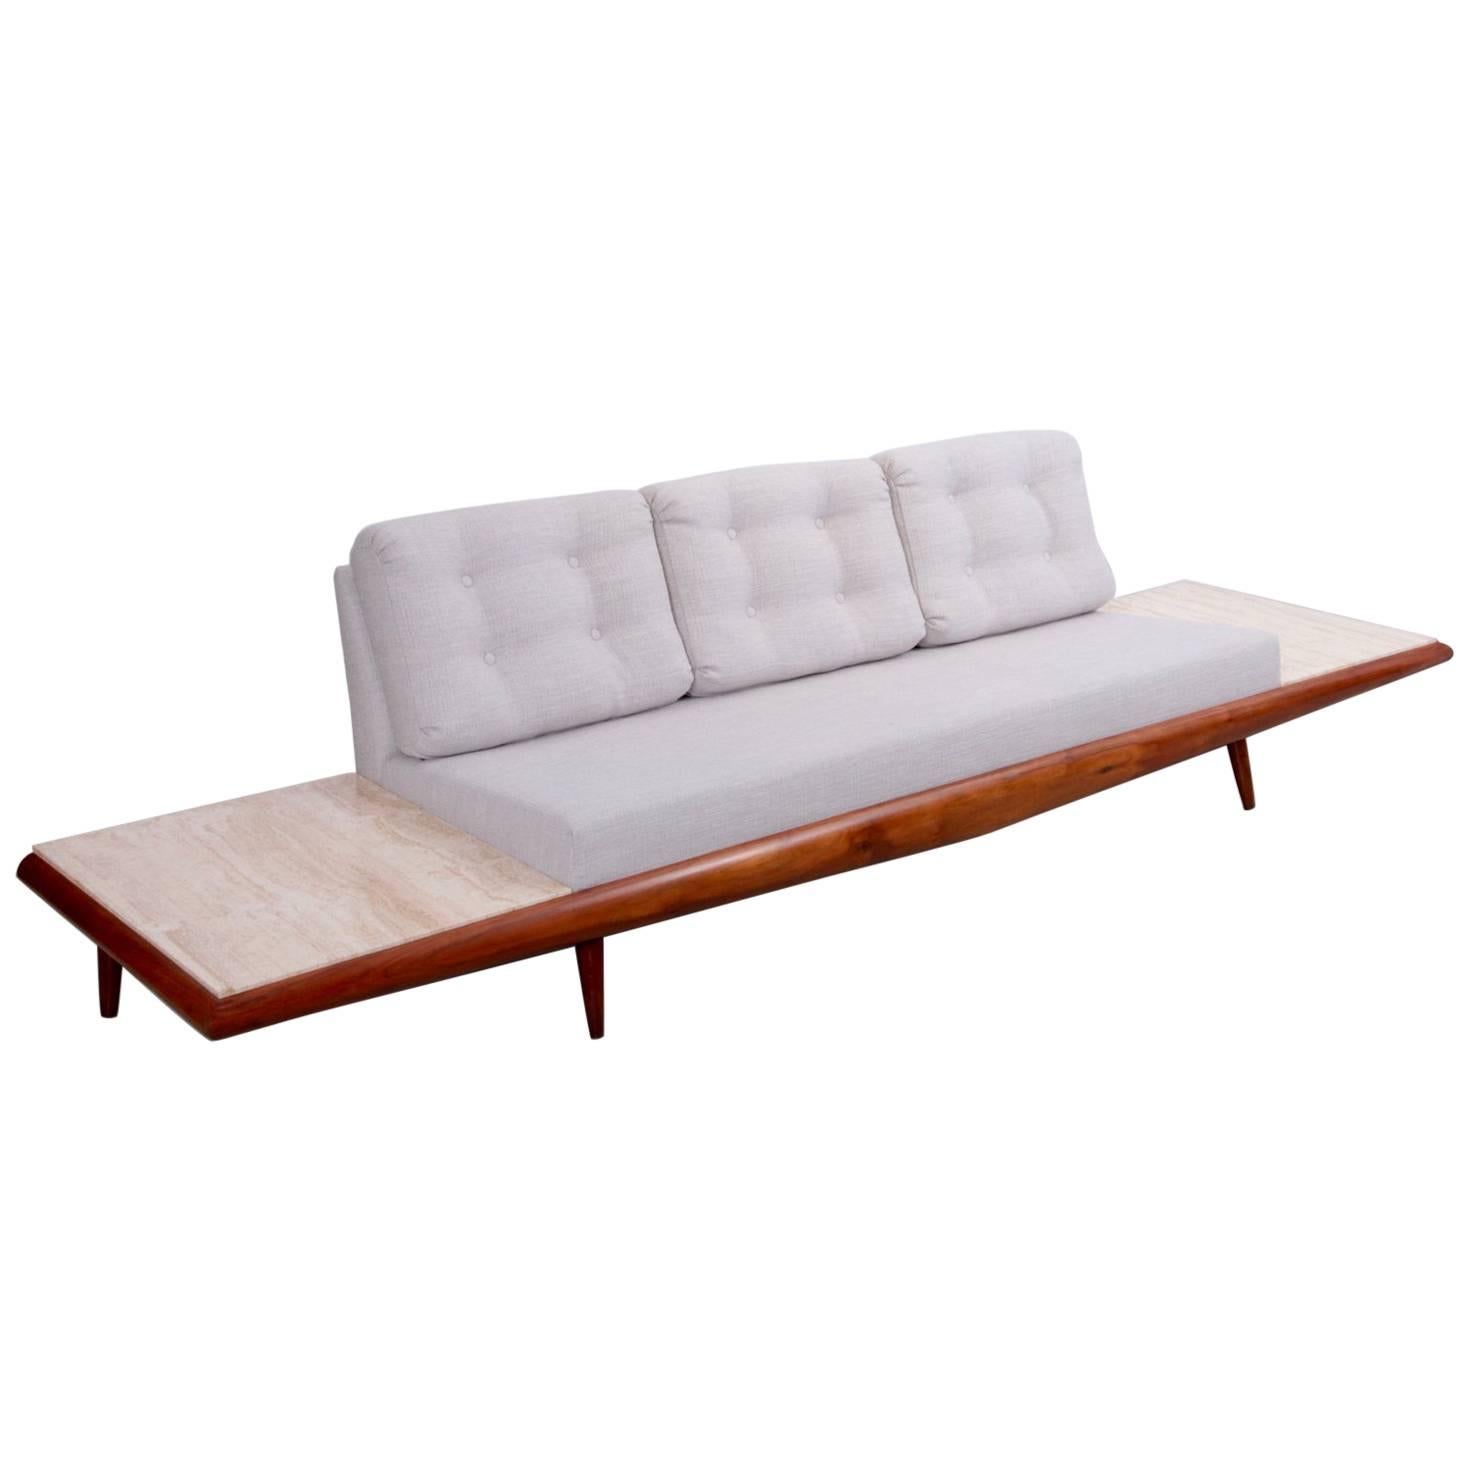 Adrian Pearsall Sofa with Travertine Side Tables for Craft Associates